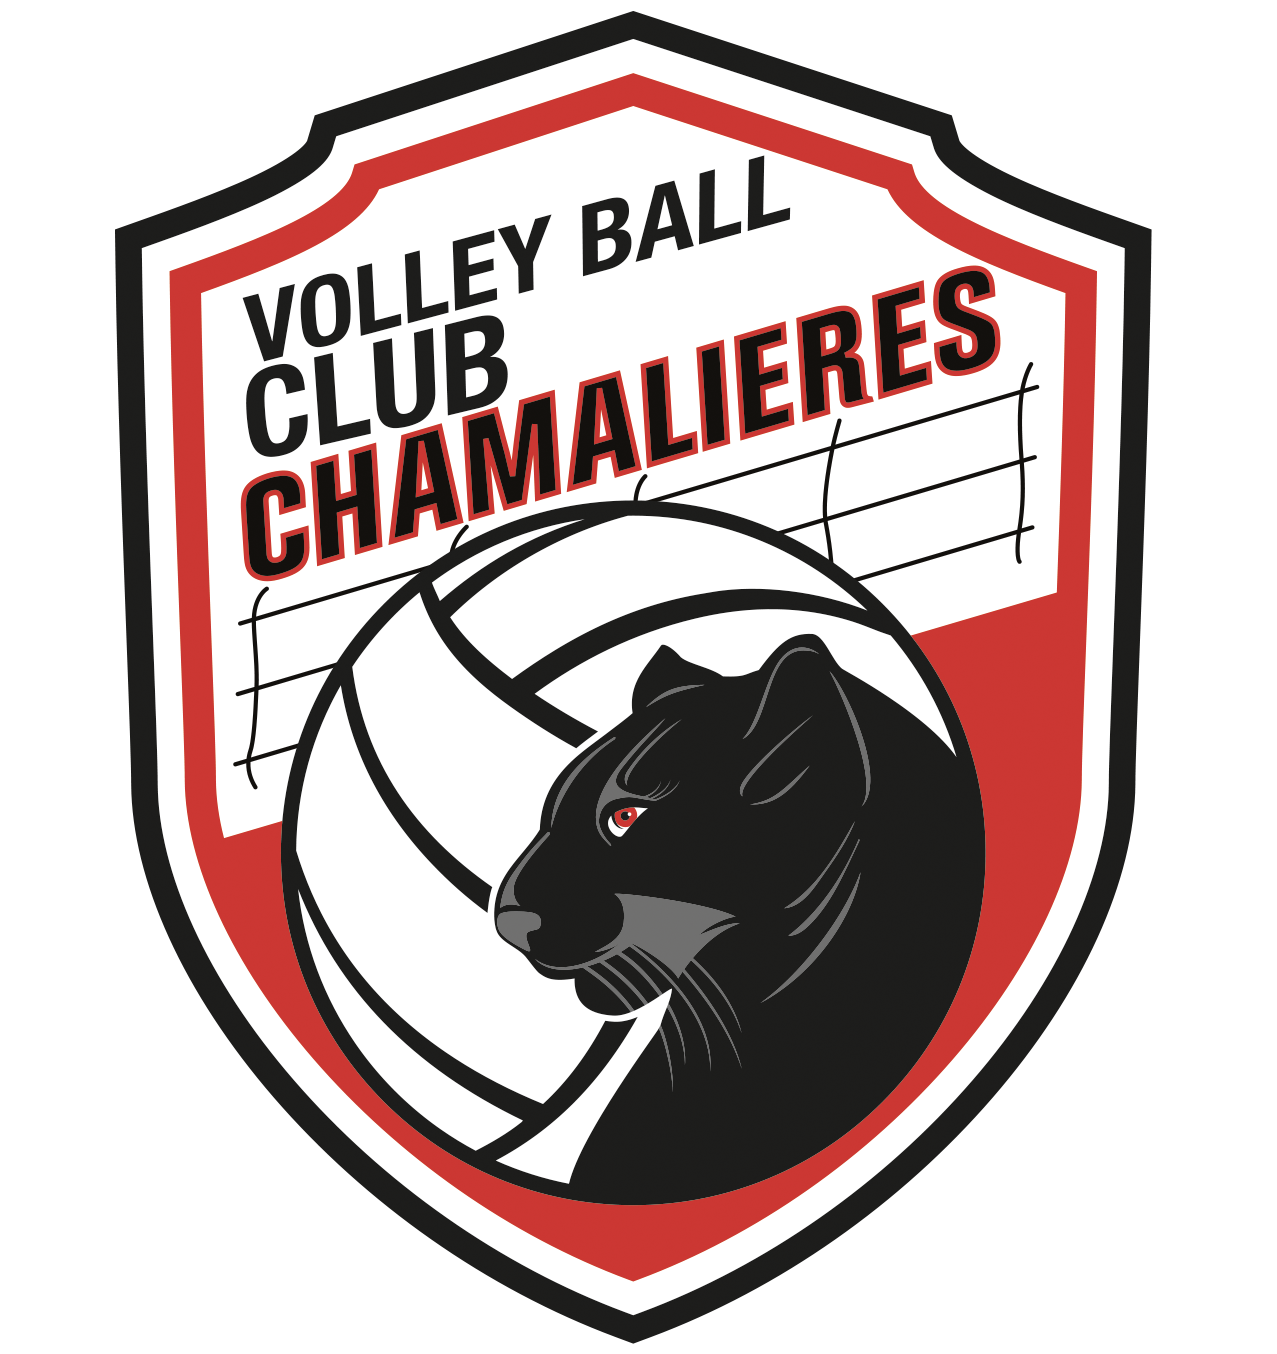 Volley Ball Chamalières